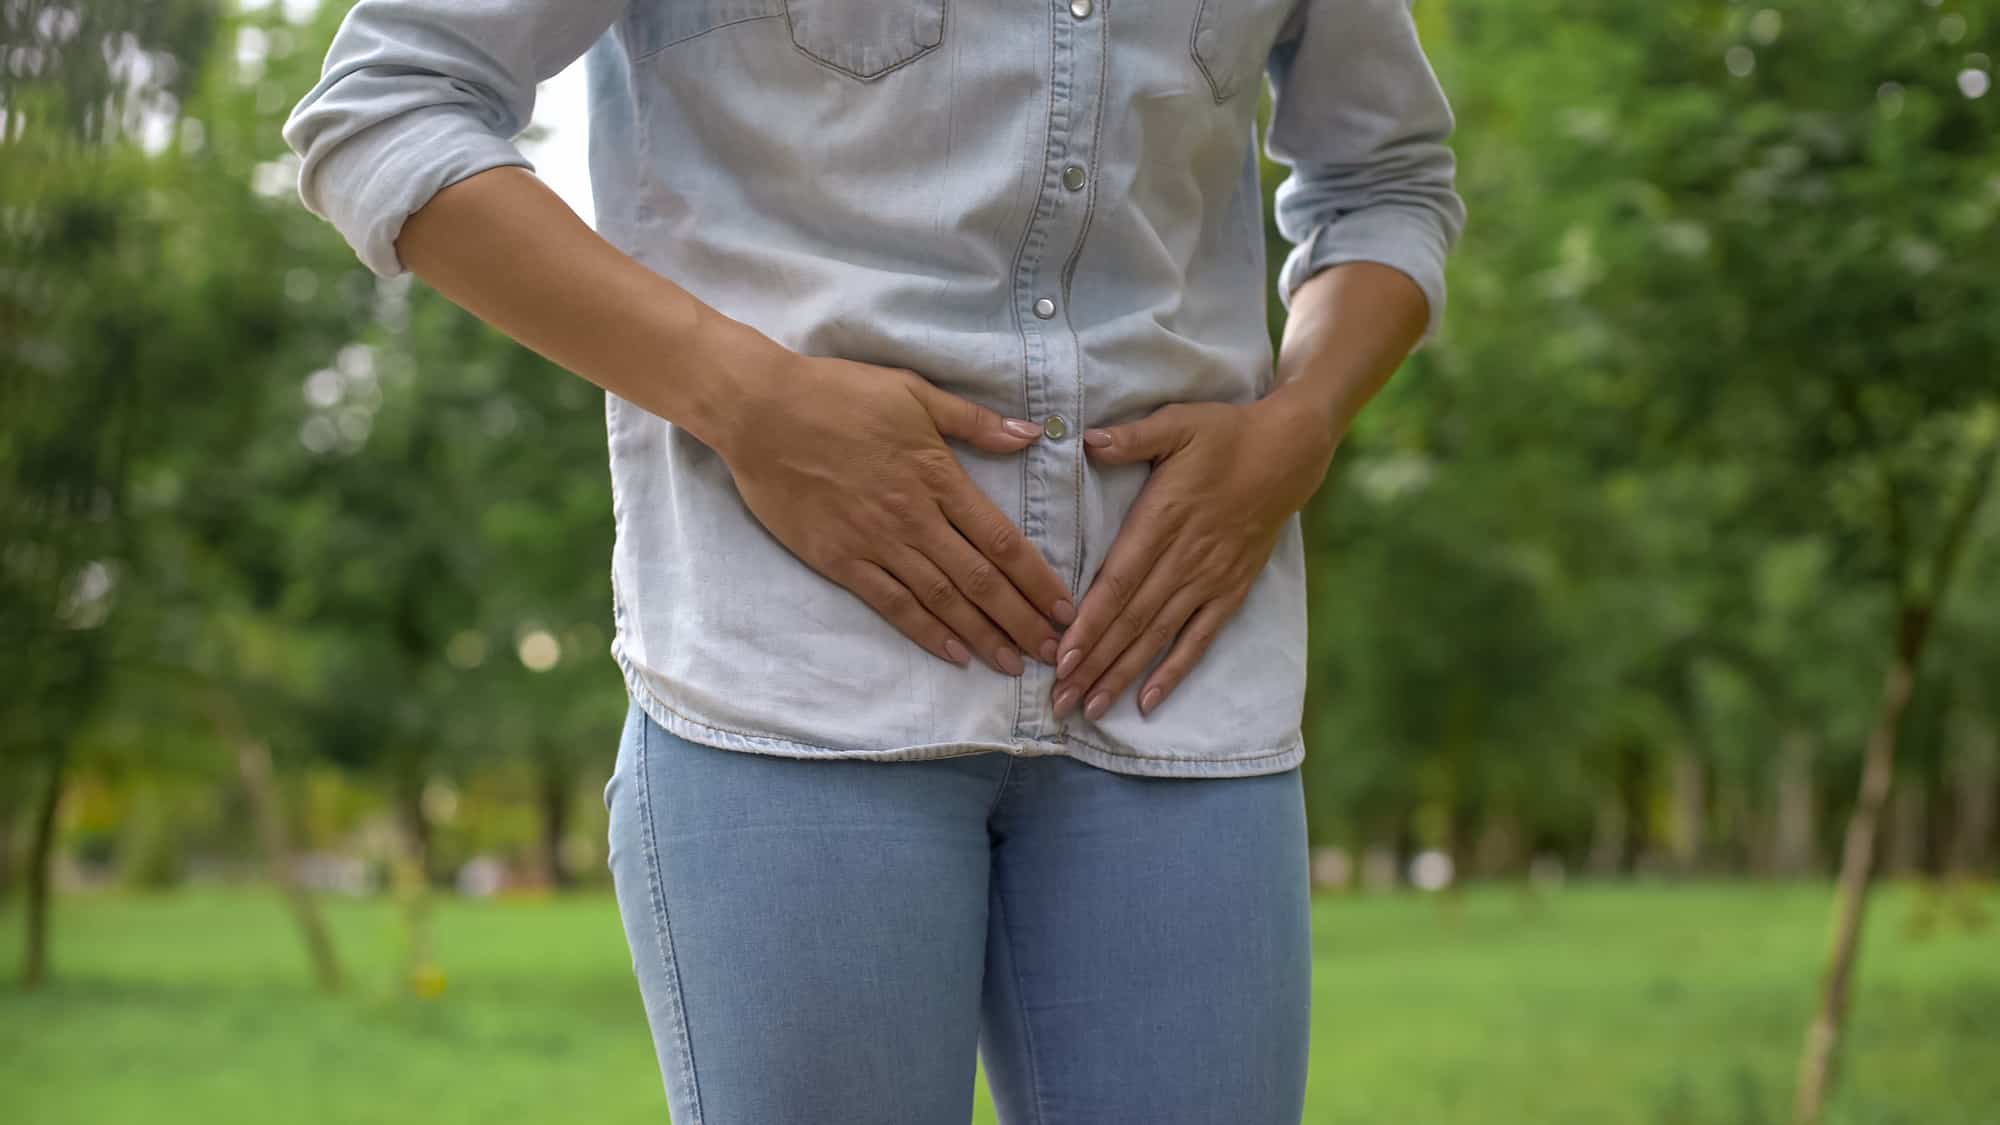 What Could Be Behind My Lower Abdominal Pain?